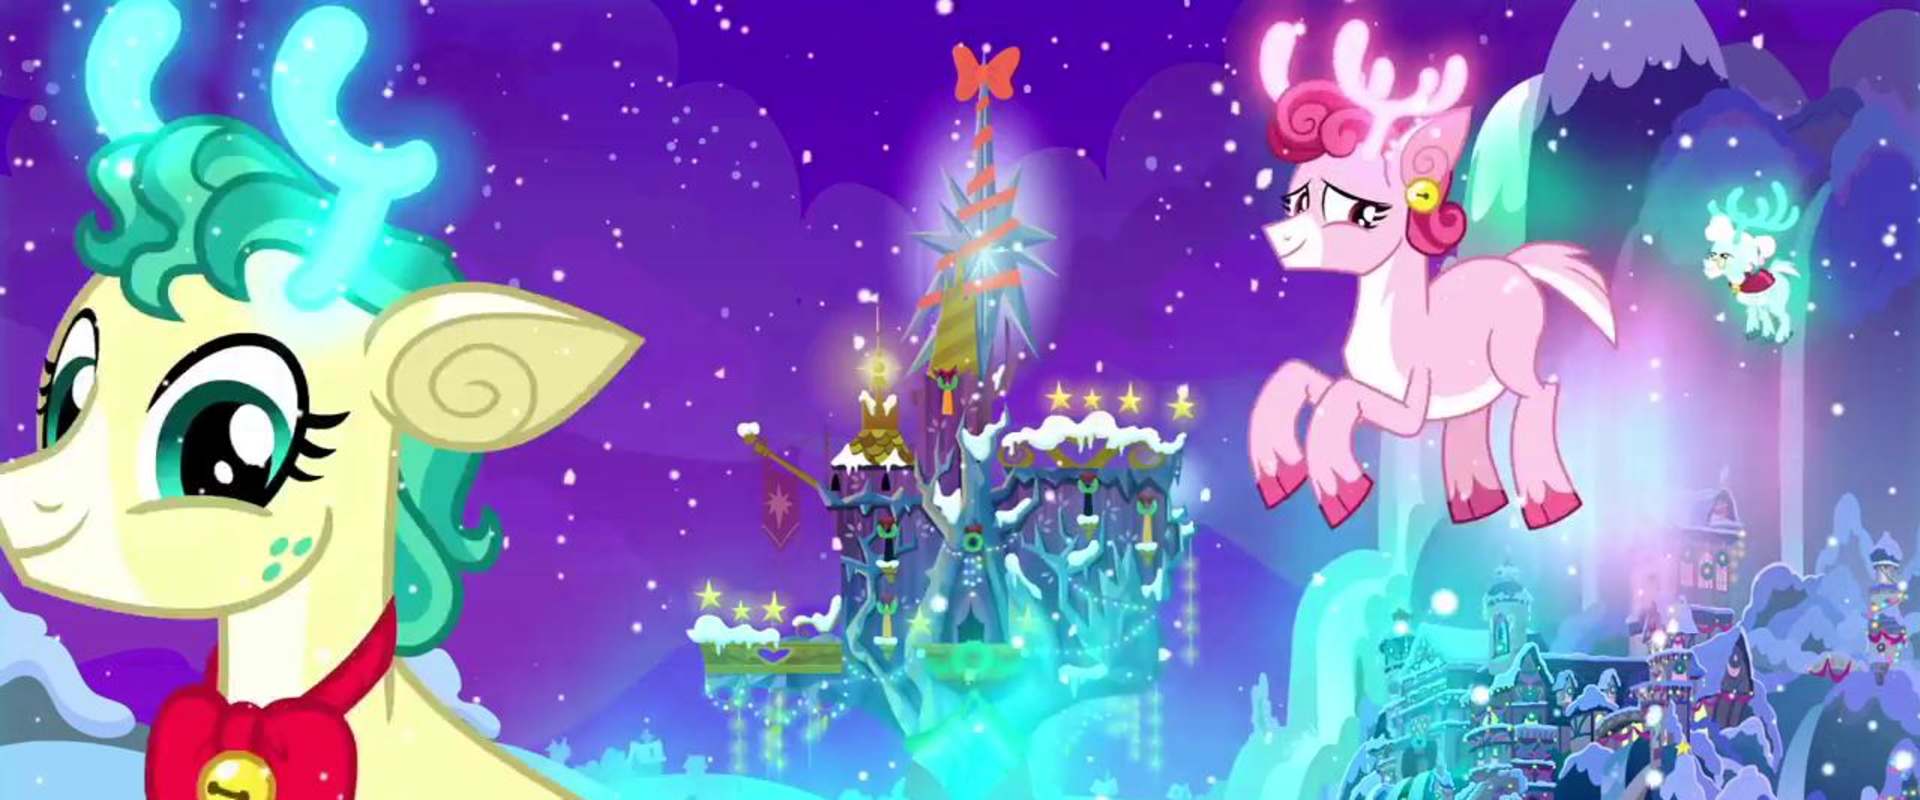 My Little Pony: Best Gift Ever background 2